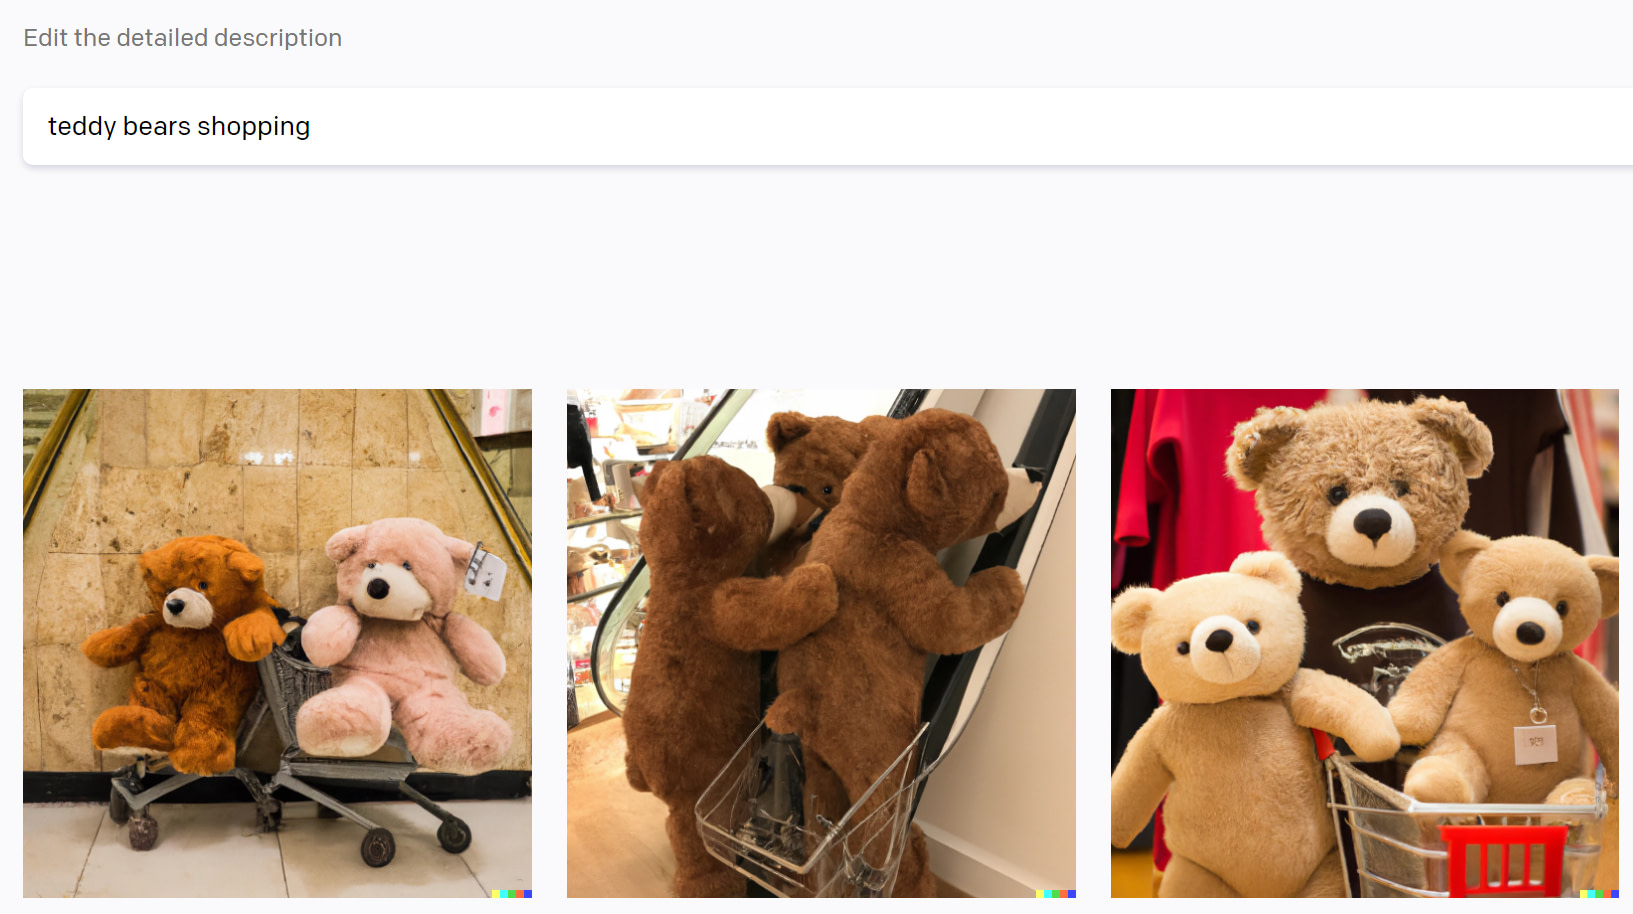 Three AI-generated images produced by the prompt "teddy bears shopping".